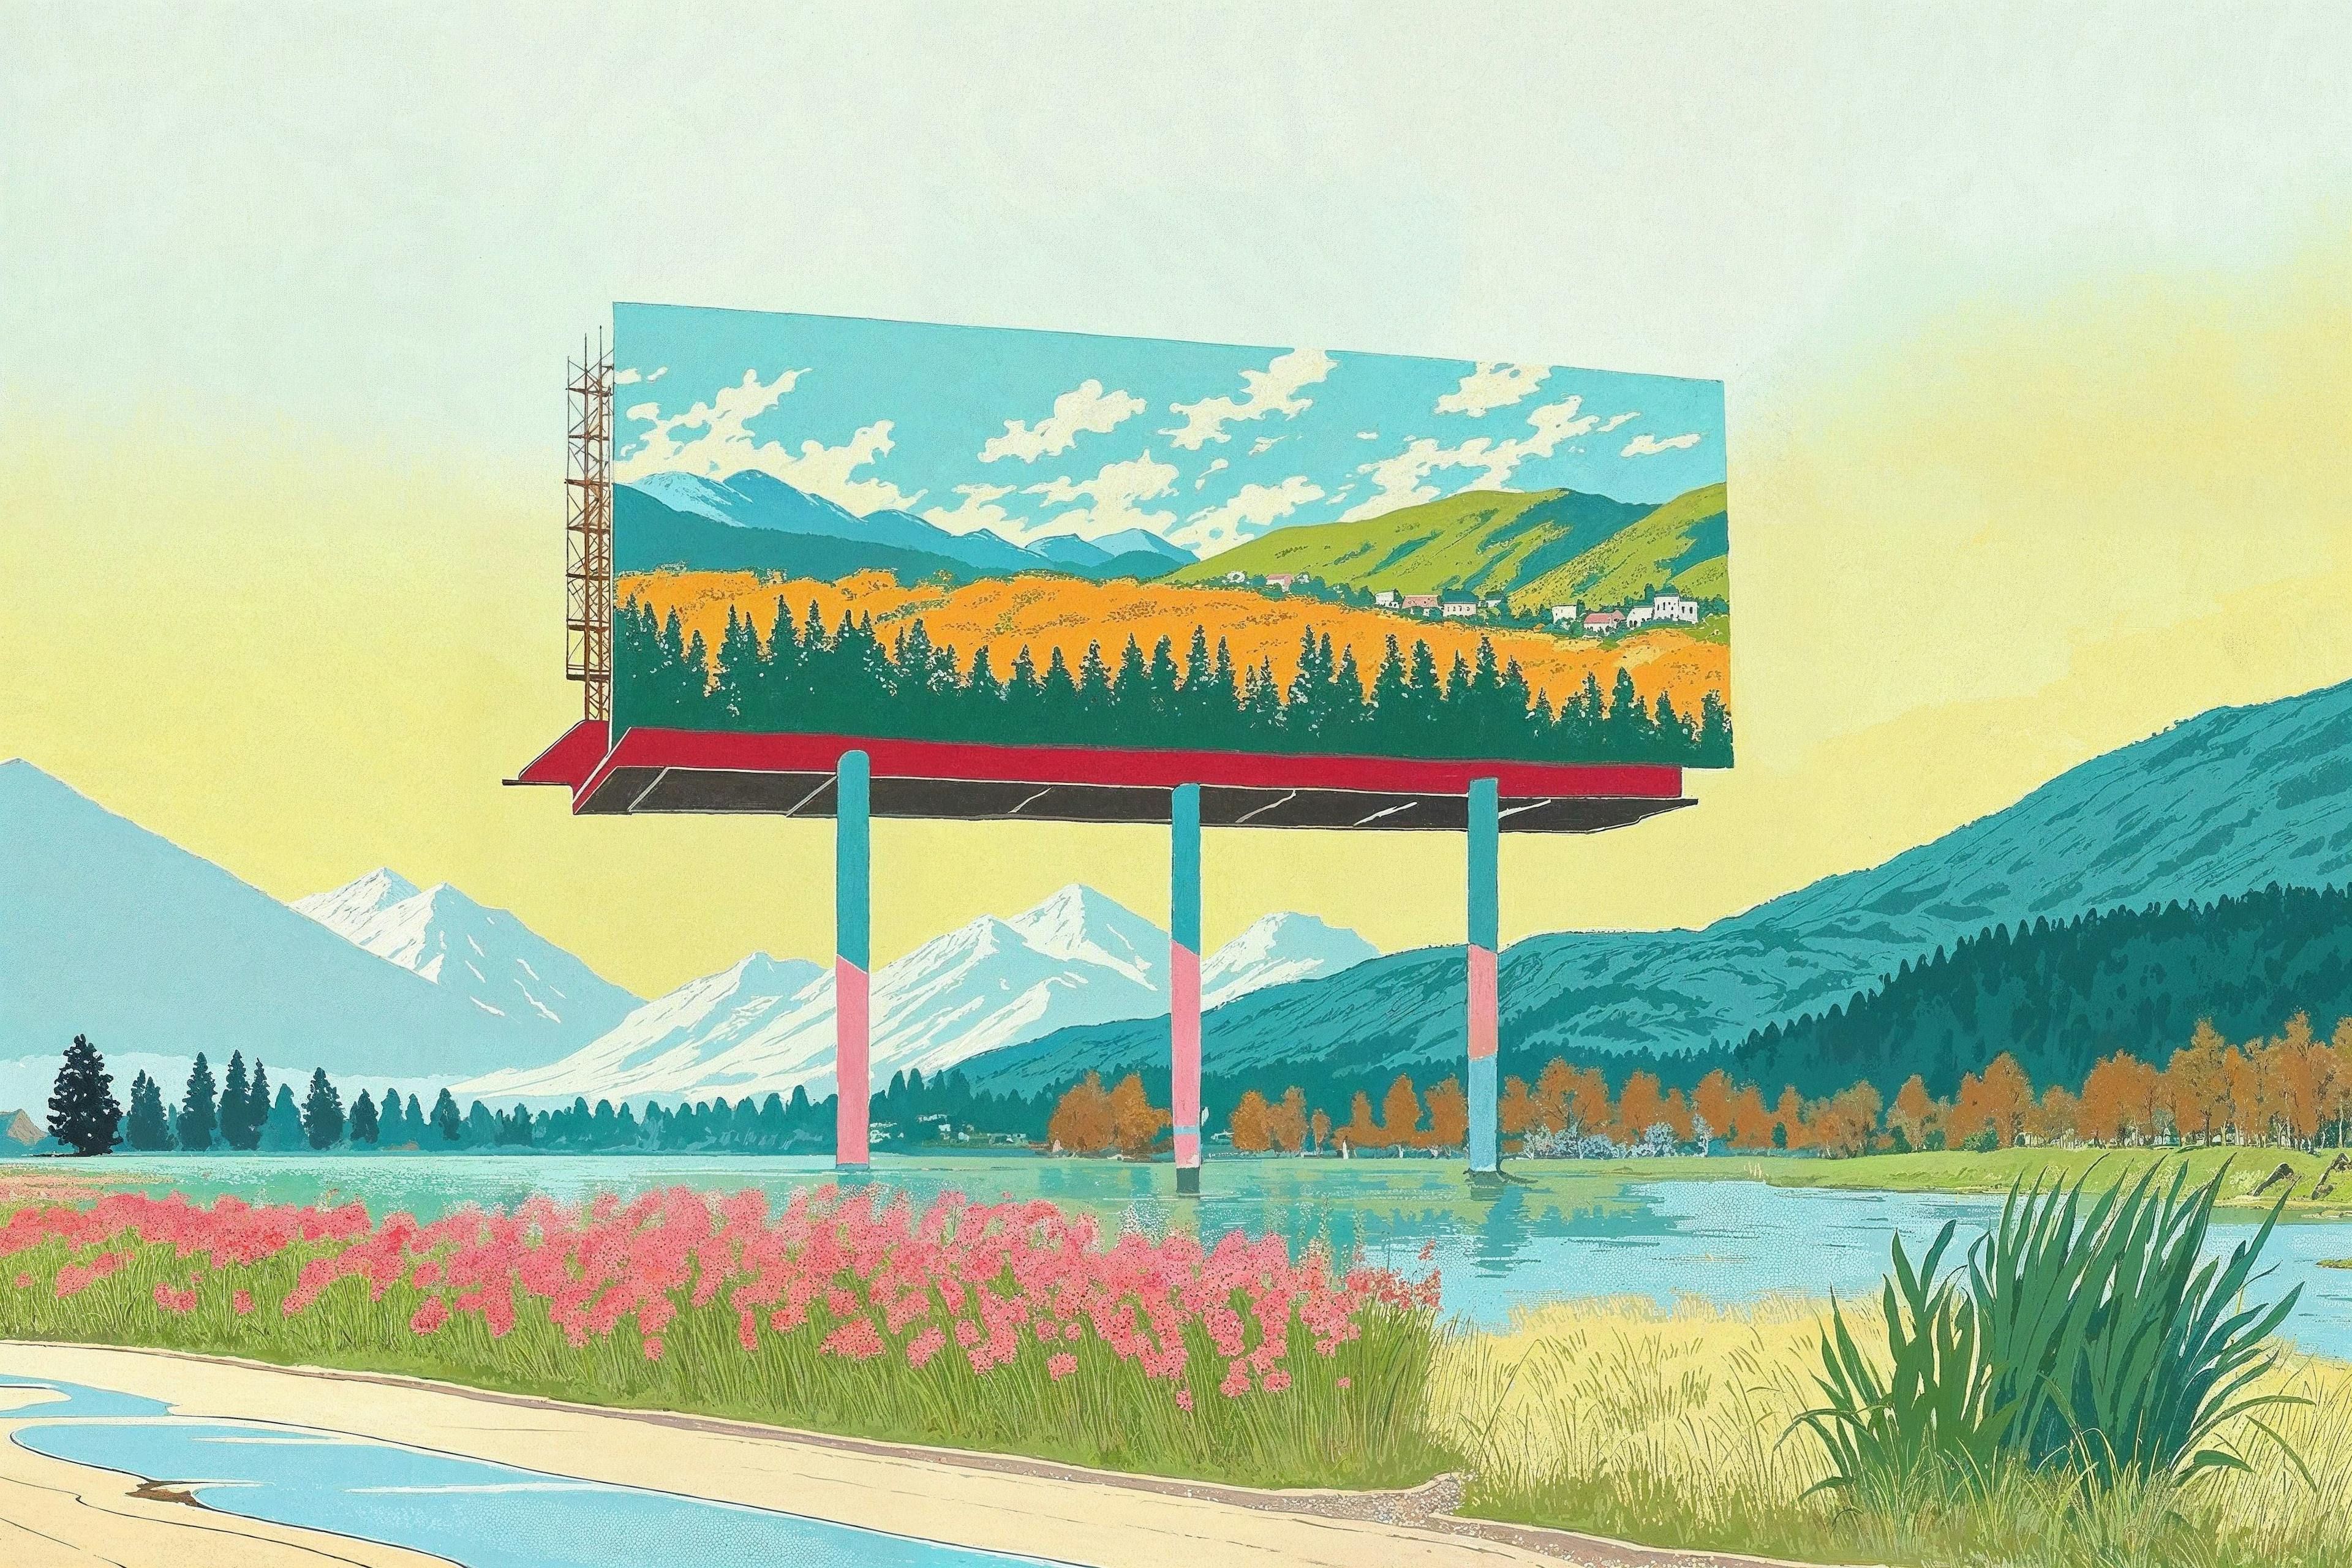 Illustration of a Billboard in a Scenic Mountain Area